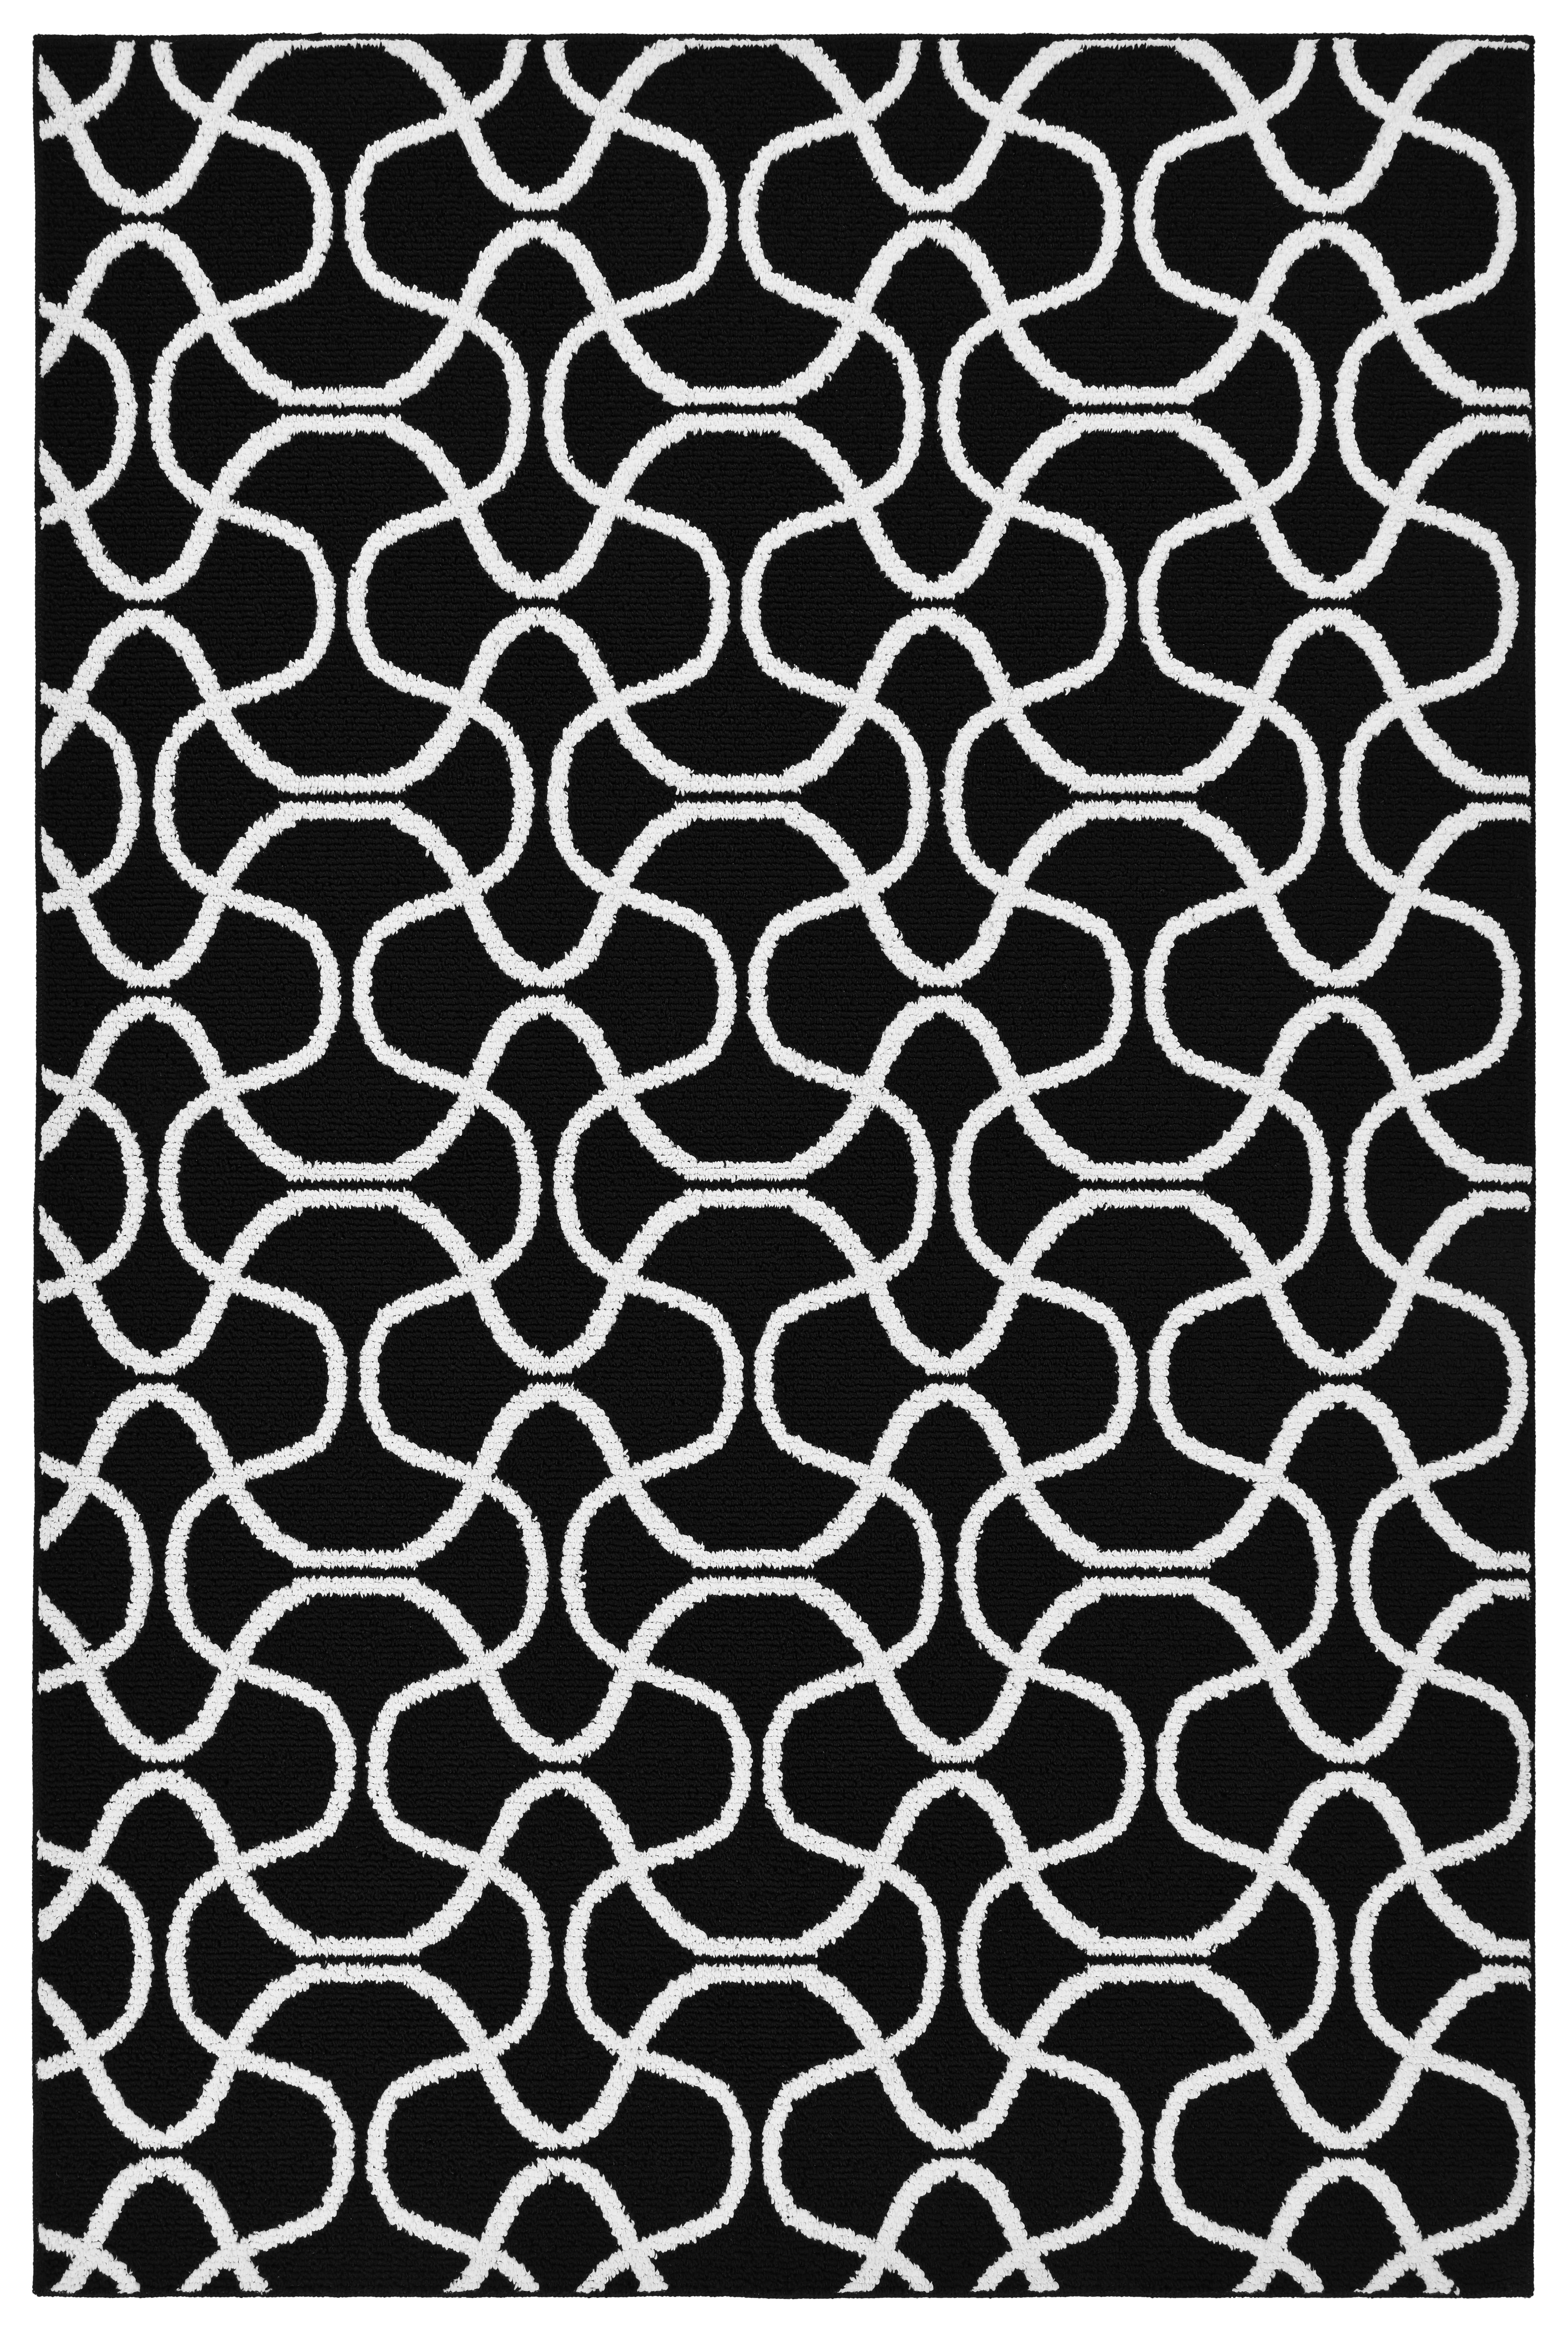 Mainstays Drizzle Black/White 45"x66" Abstract Indoor Area Rug - image 1 of 4